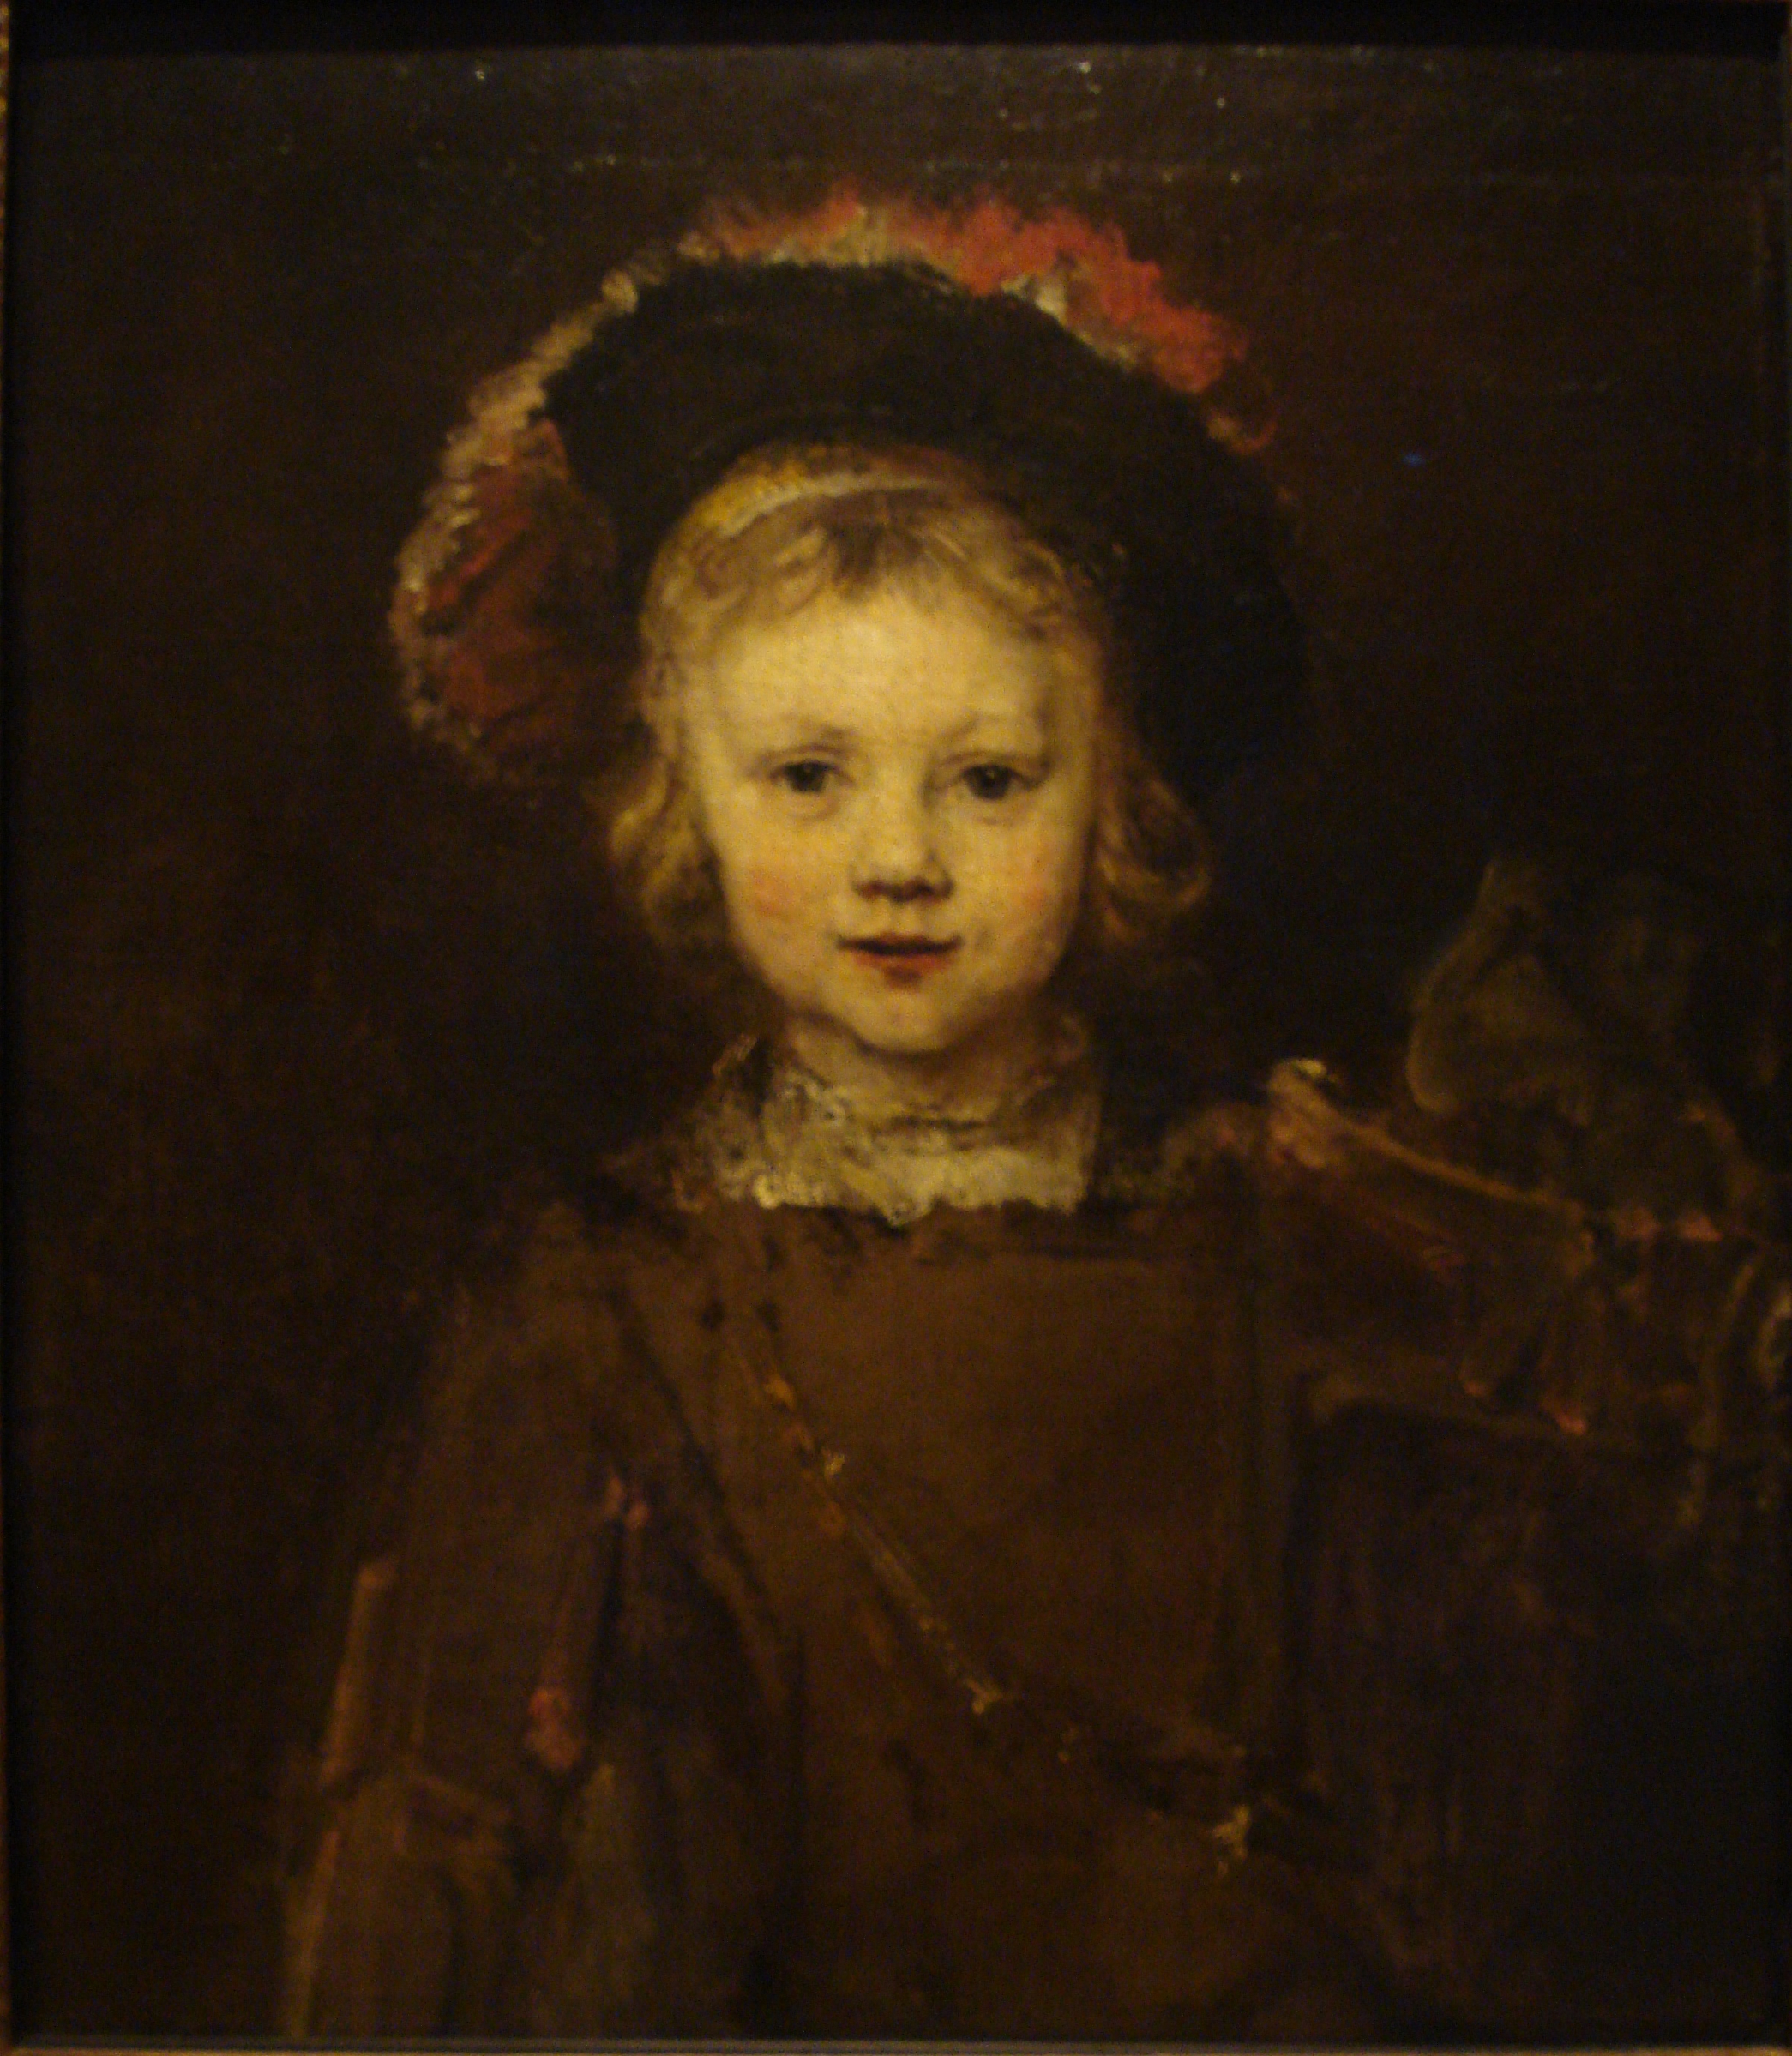 File:Portrait of a boy by Rembrandt.jpg - Wikimedia Commons